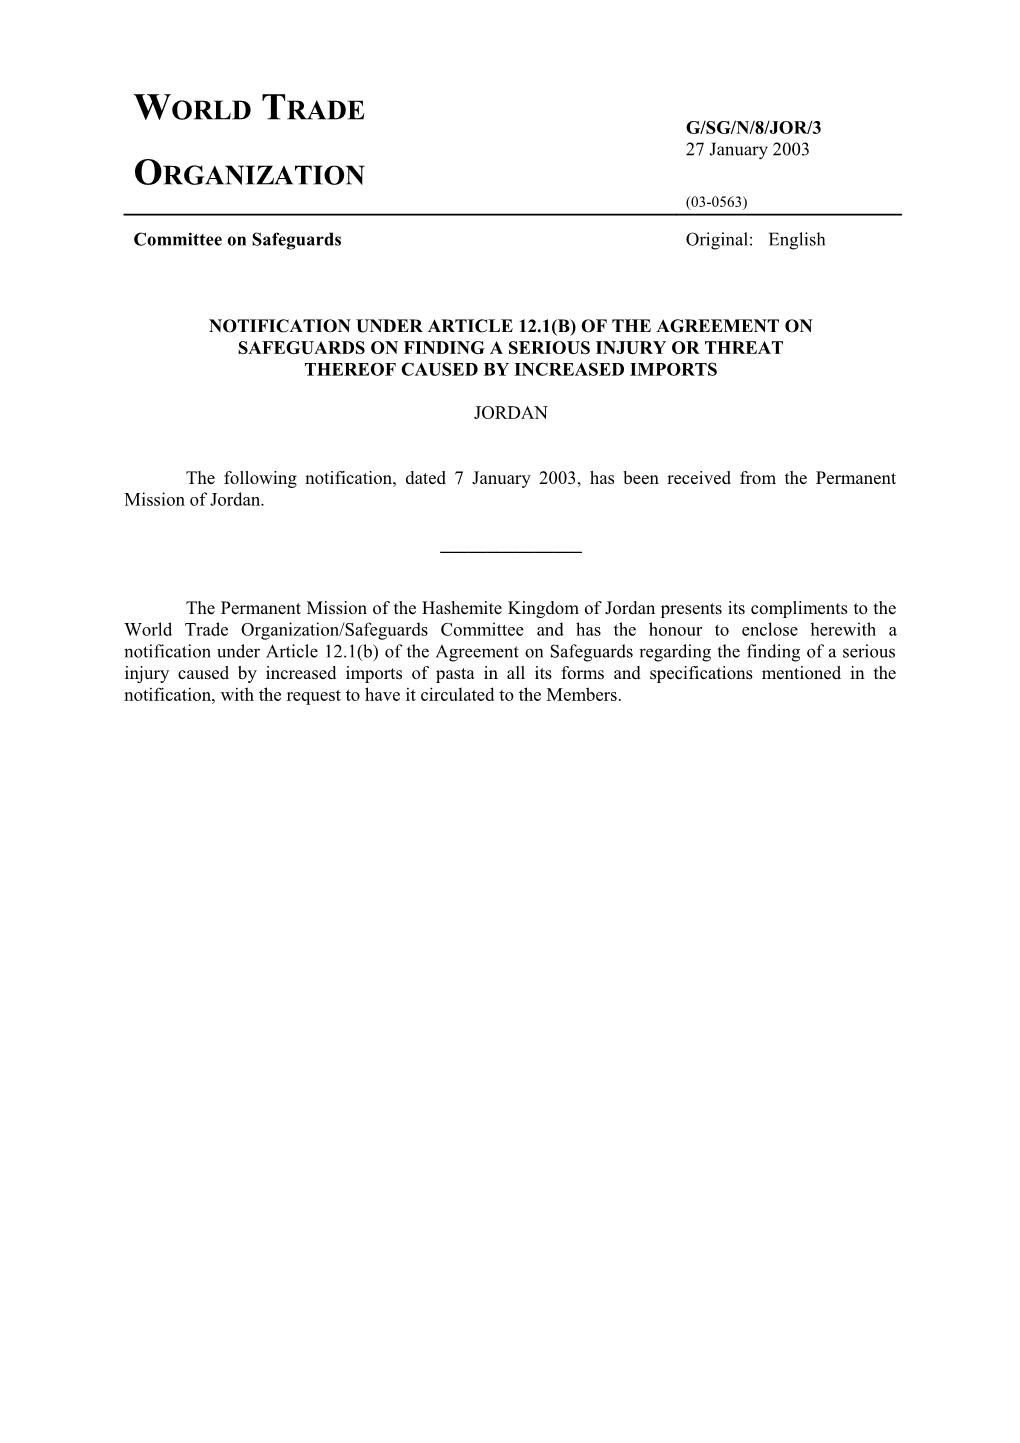 Notification Under Article 12.1(B) of the Agreement On